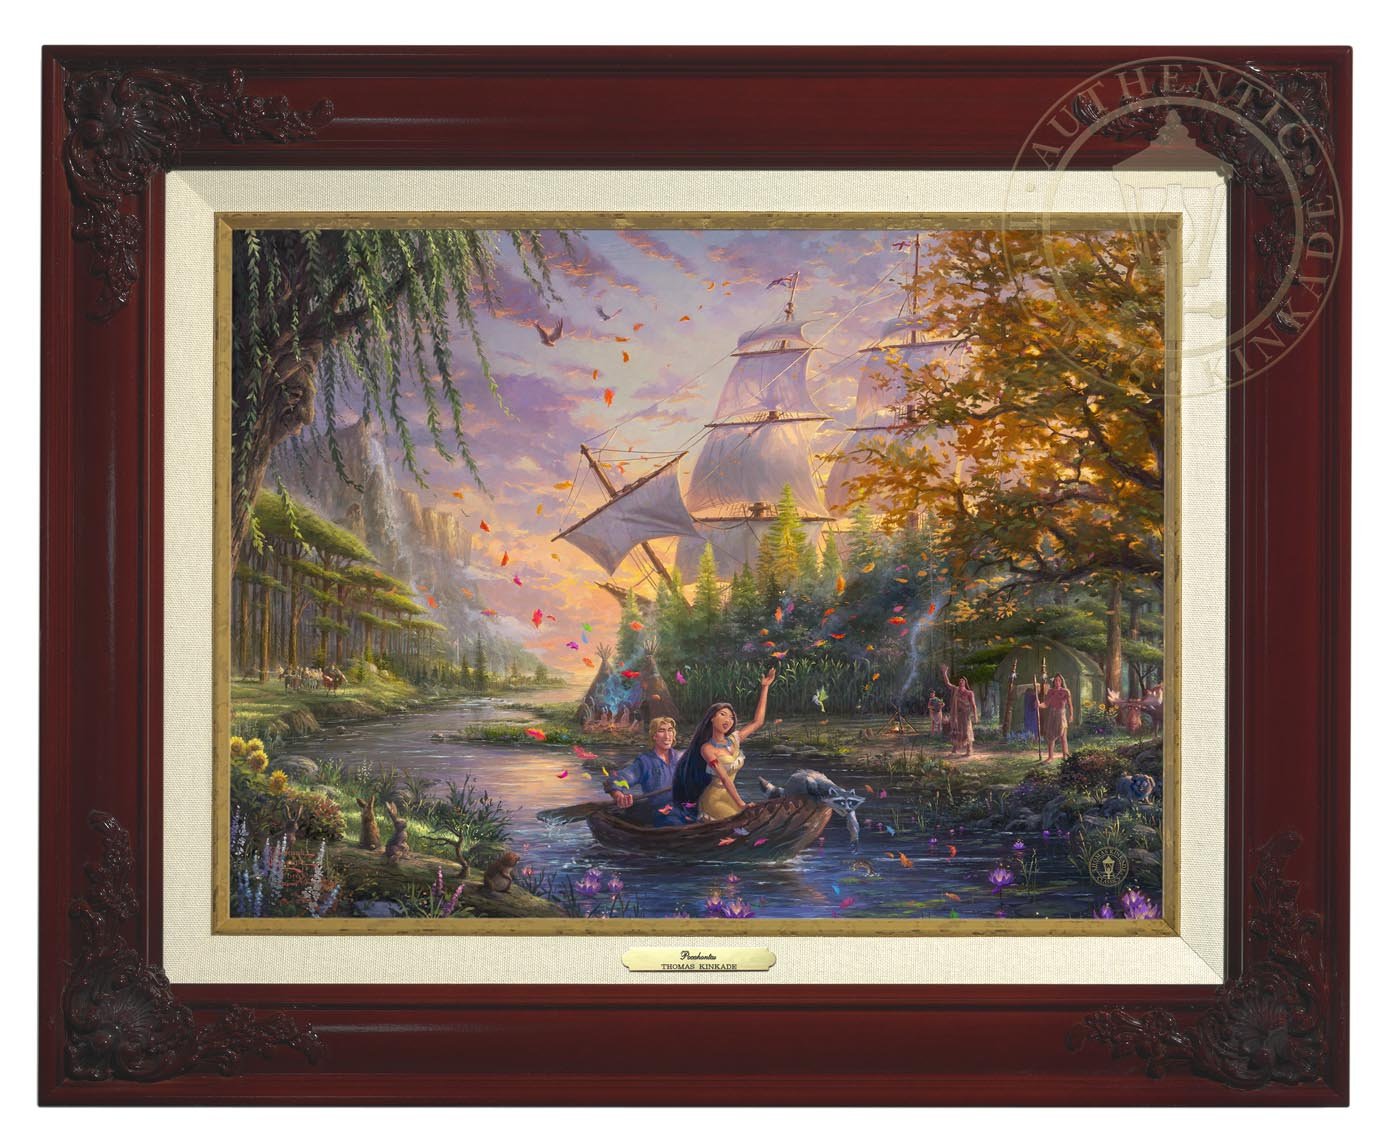 Pocahontas’s friends, the raccoon Meeko and hummingbird Flit, keep a careful watch over her as she and John Smith travels downstream - Brandy Frame